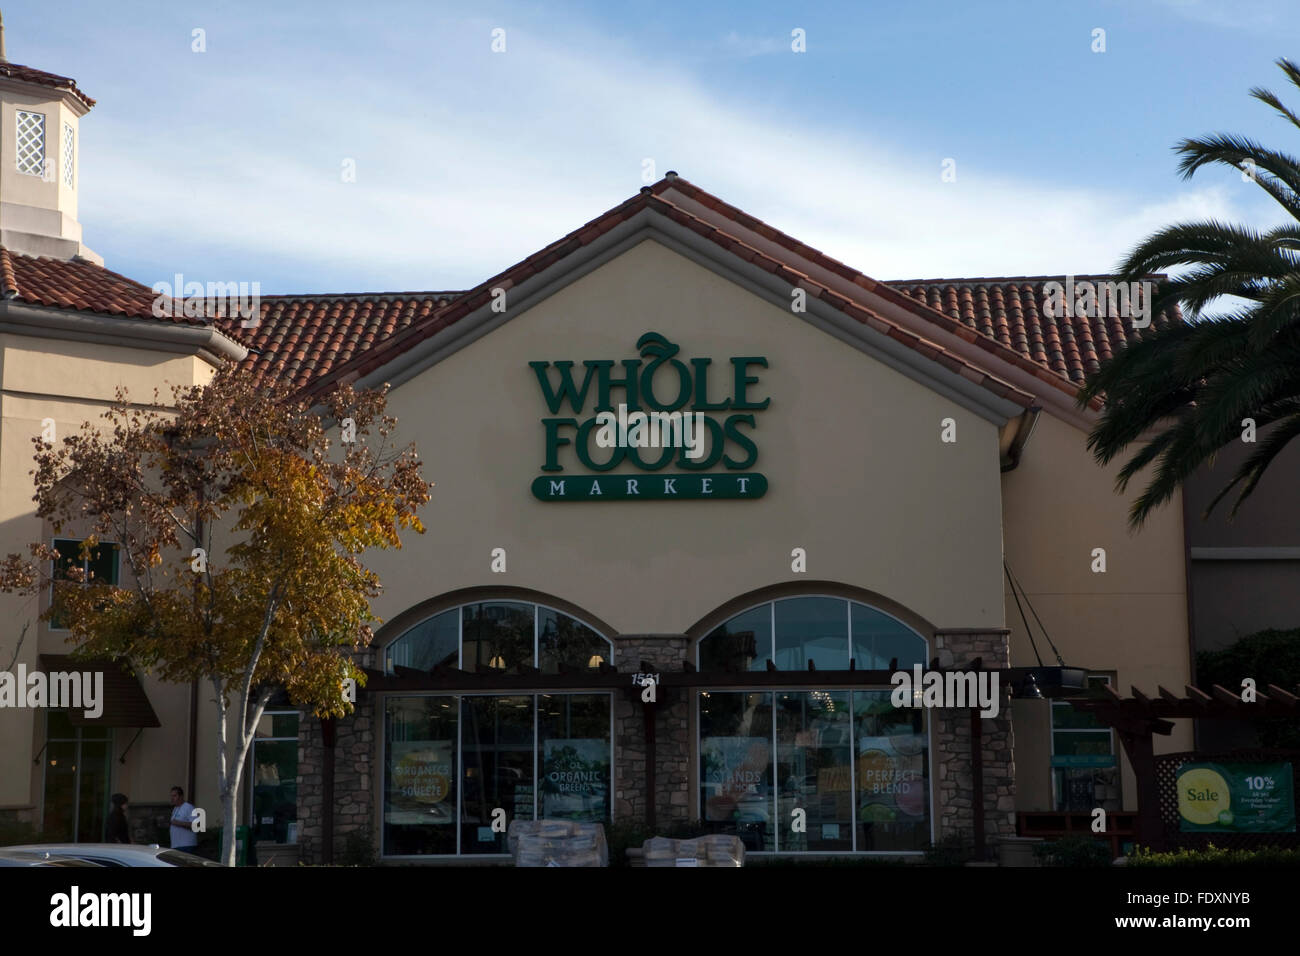 Whole Foods Stock Photos & Whole Foods Stock Images - Alamy